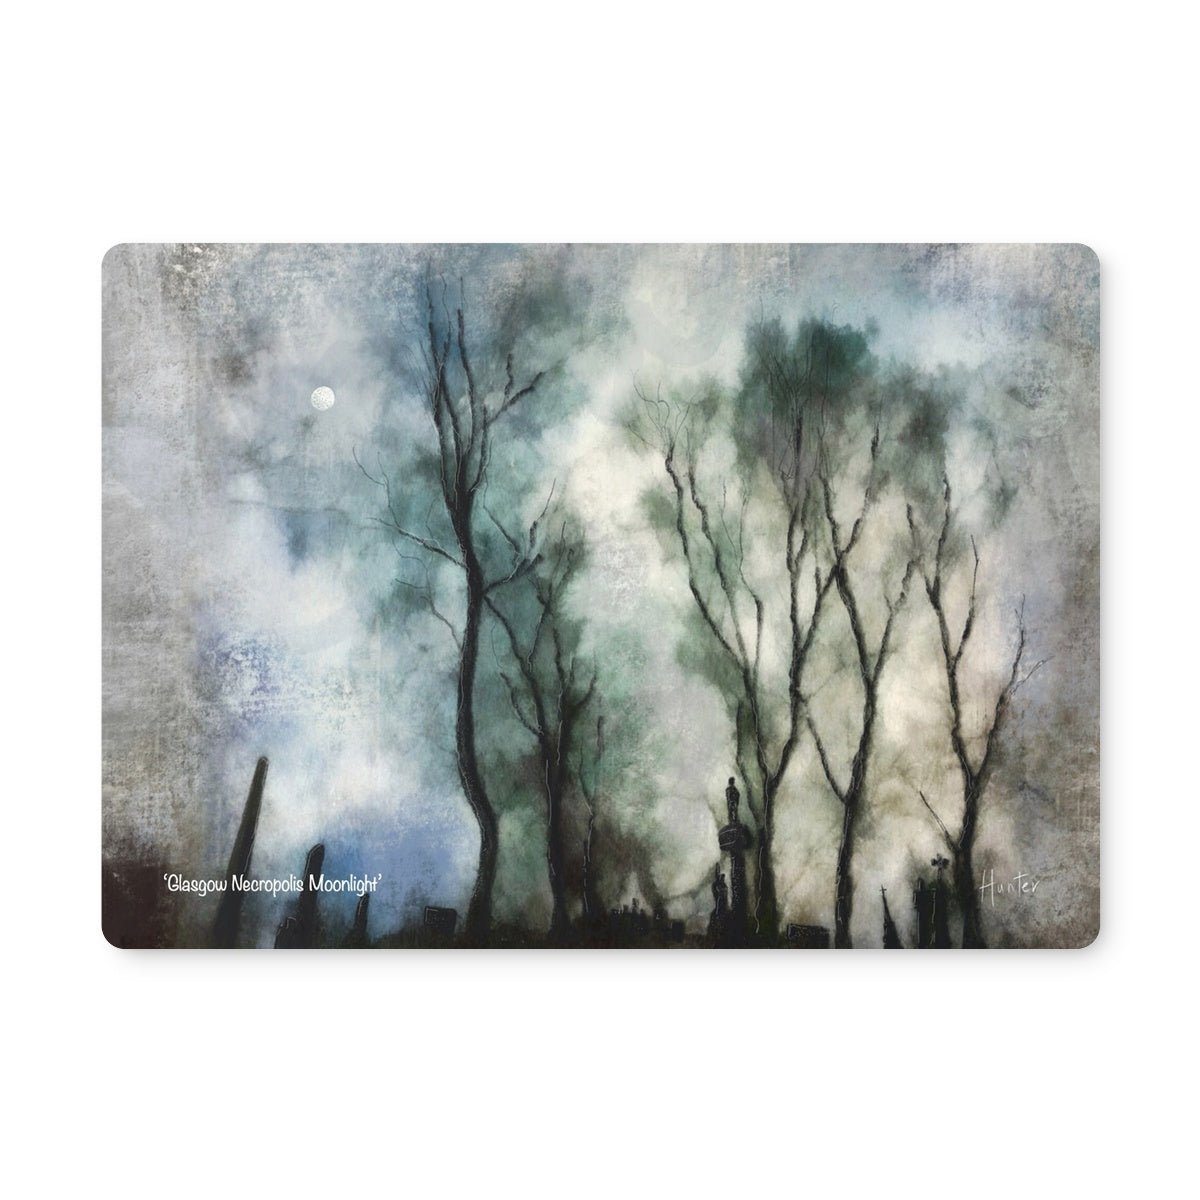 Glasgow Necropolis Moonlight Art Gifts Placemat-Placemats-Edinburgh & Glasgow Art Gallery-6 Placemats-Paintings, Prints, Homeware, Art Gifts From Scotland By Scottish Artist Kevin Hunter